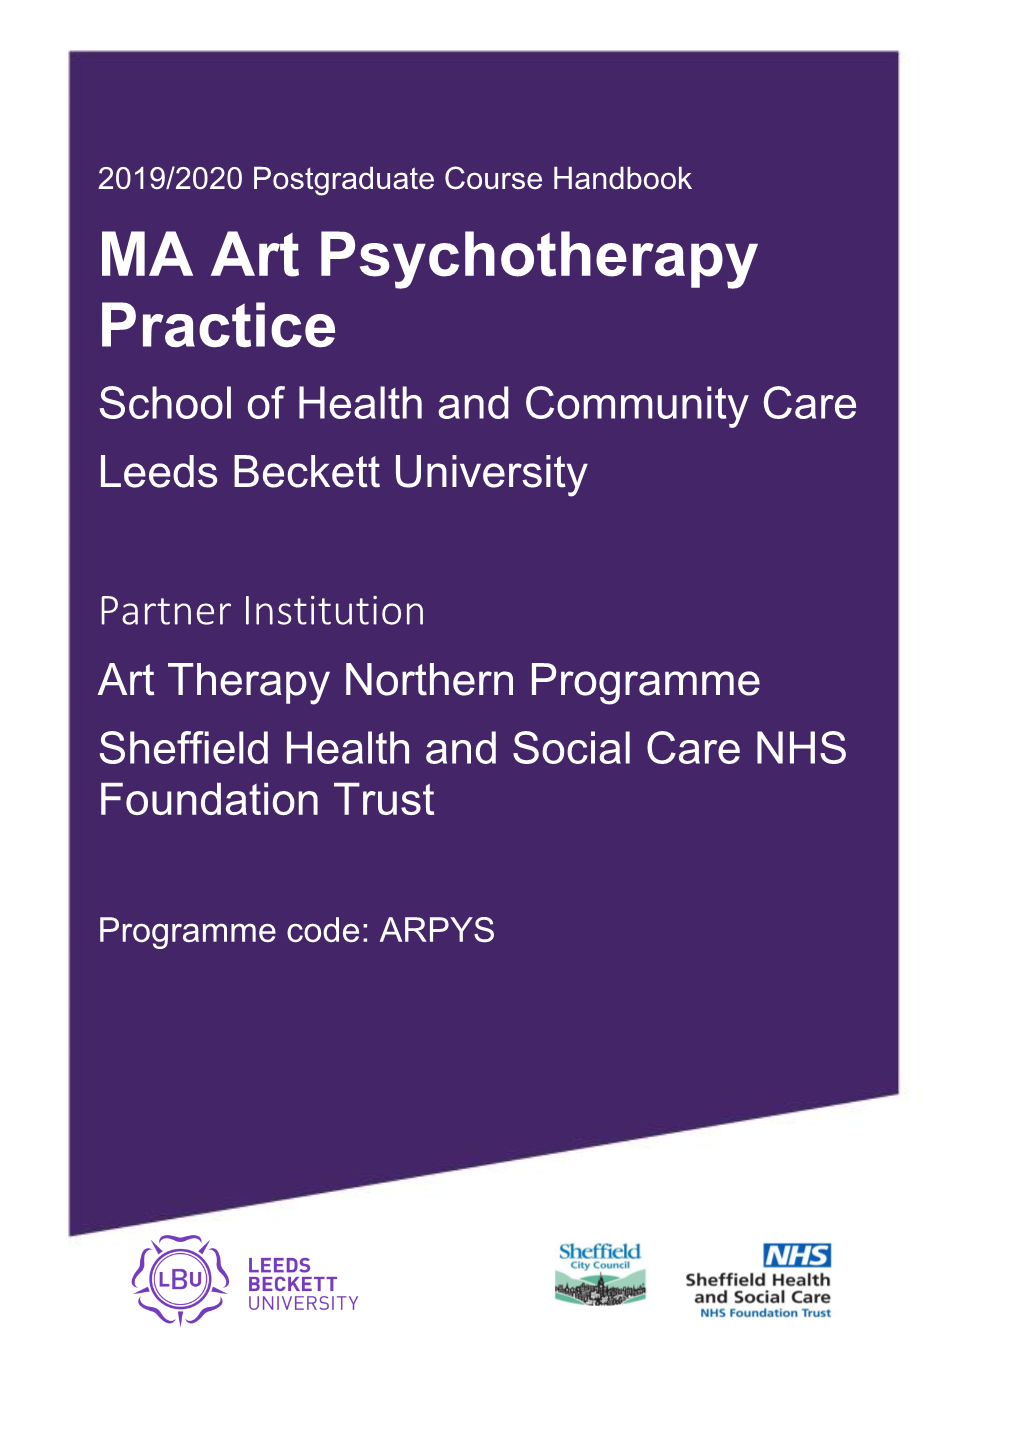 MA Art Psychotherapy Practice School of Health and Community Care Leeds Beckett University